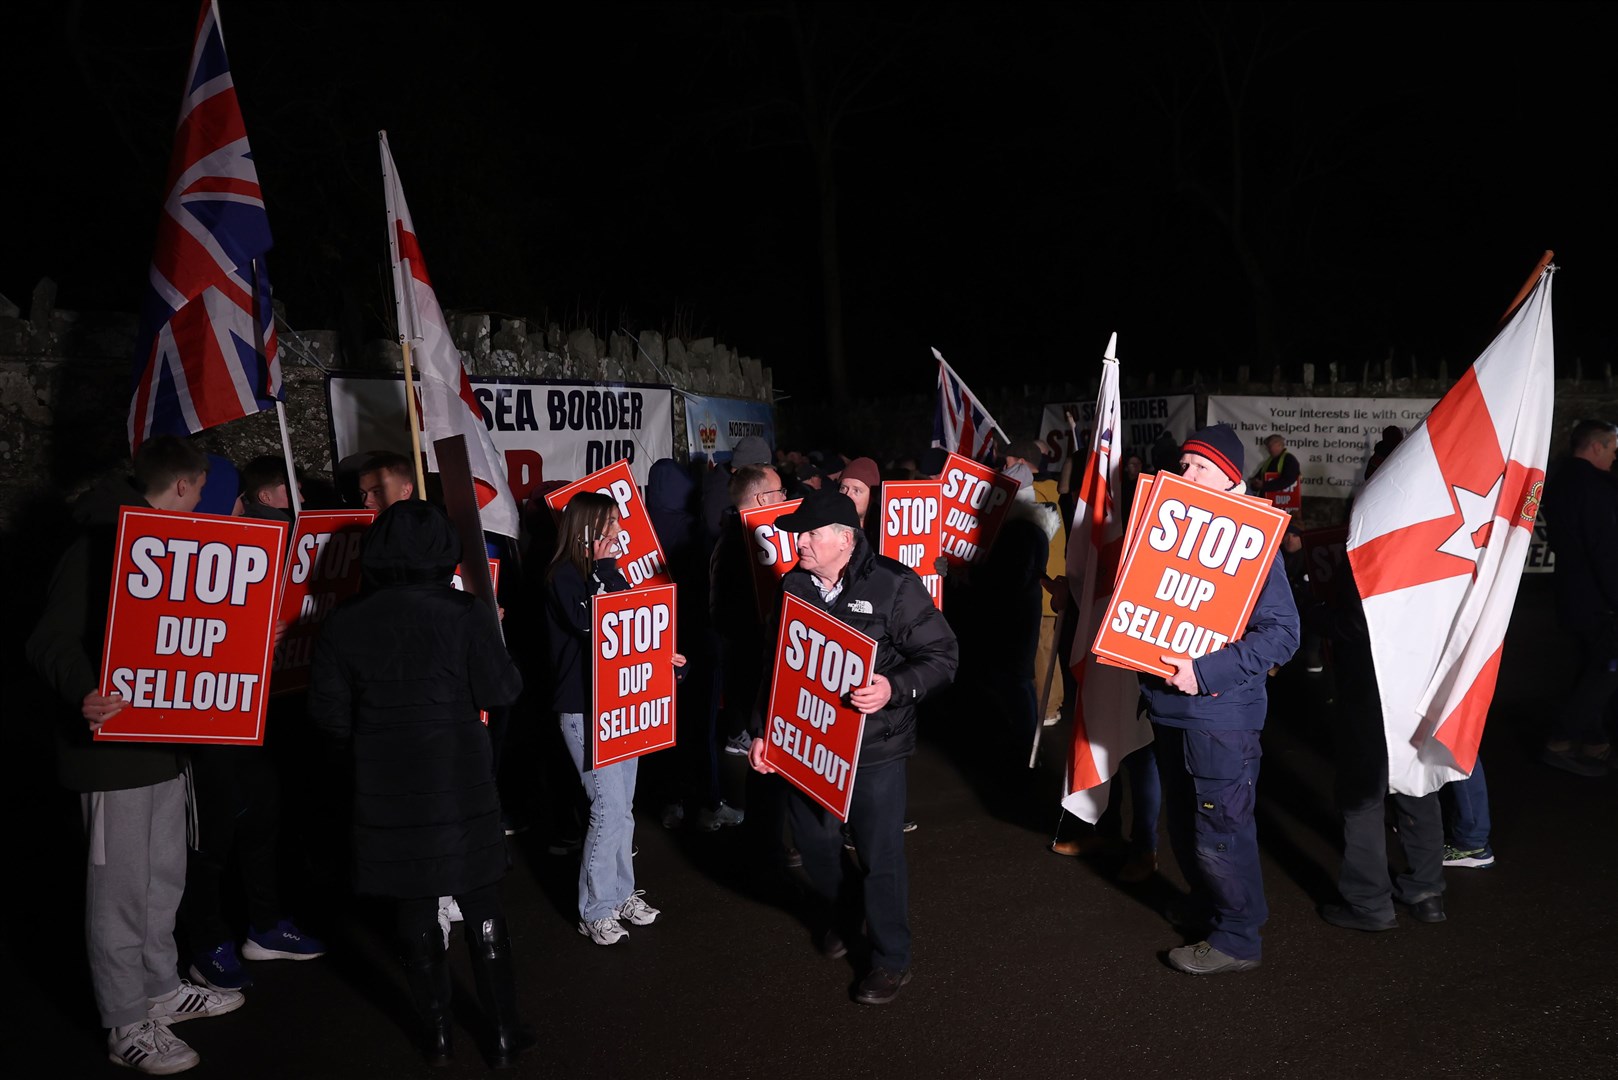 Protesters outside Larchfield Estate where the DUP held its executive meeting on Monday night (Liam McBurney/PA)